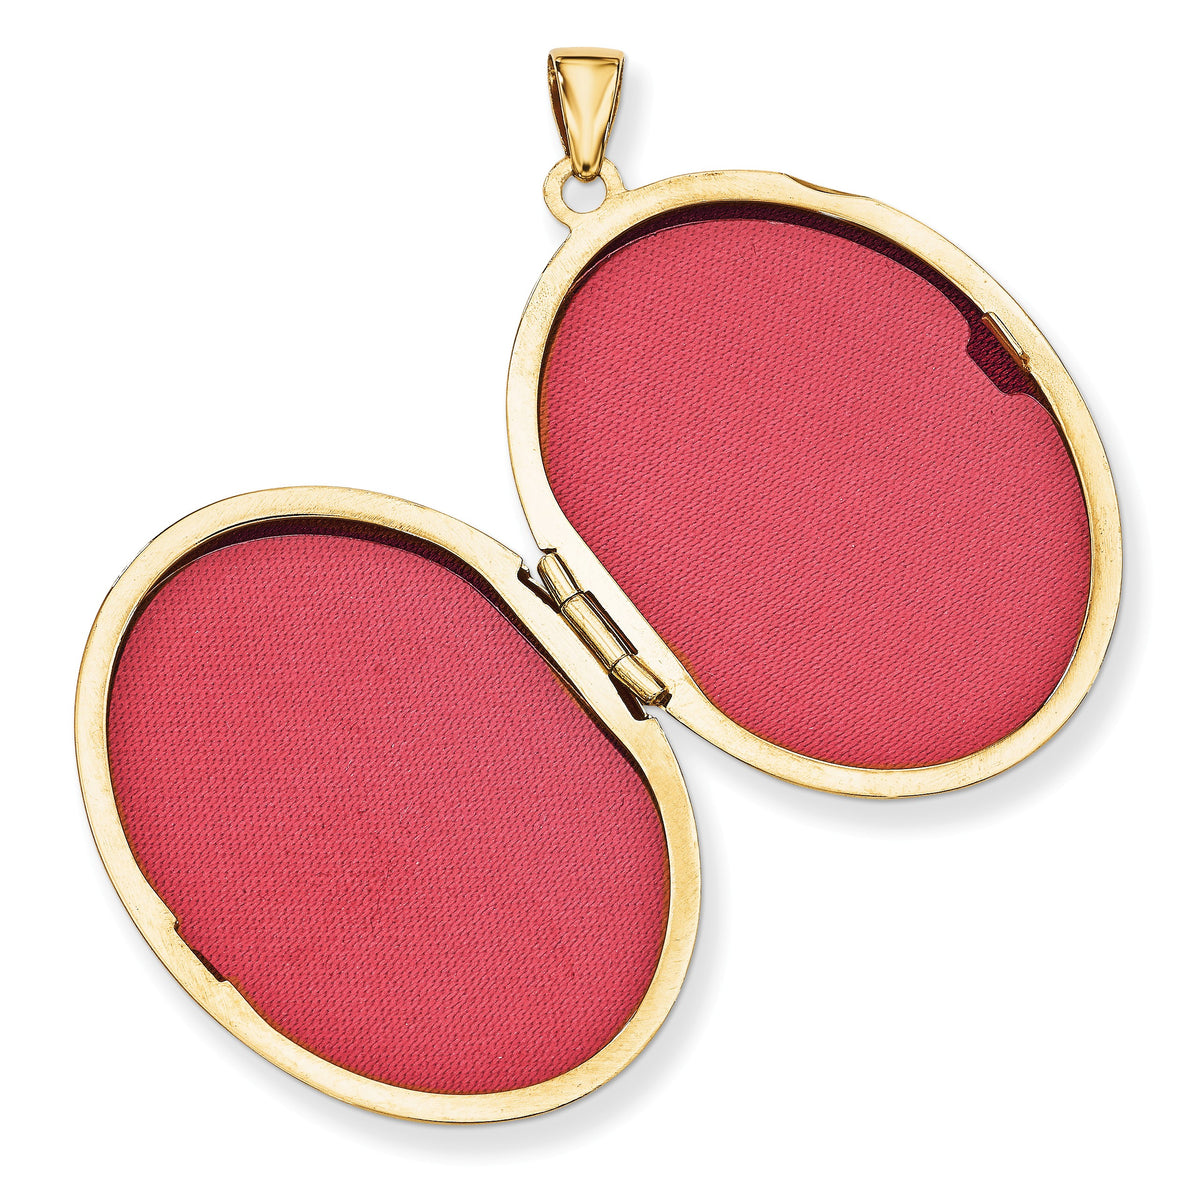 Alternate view of the 14k Yellow Gold 32mm Floral Border Oval Locket by The Black Bow Jewelry Co.